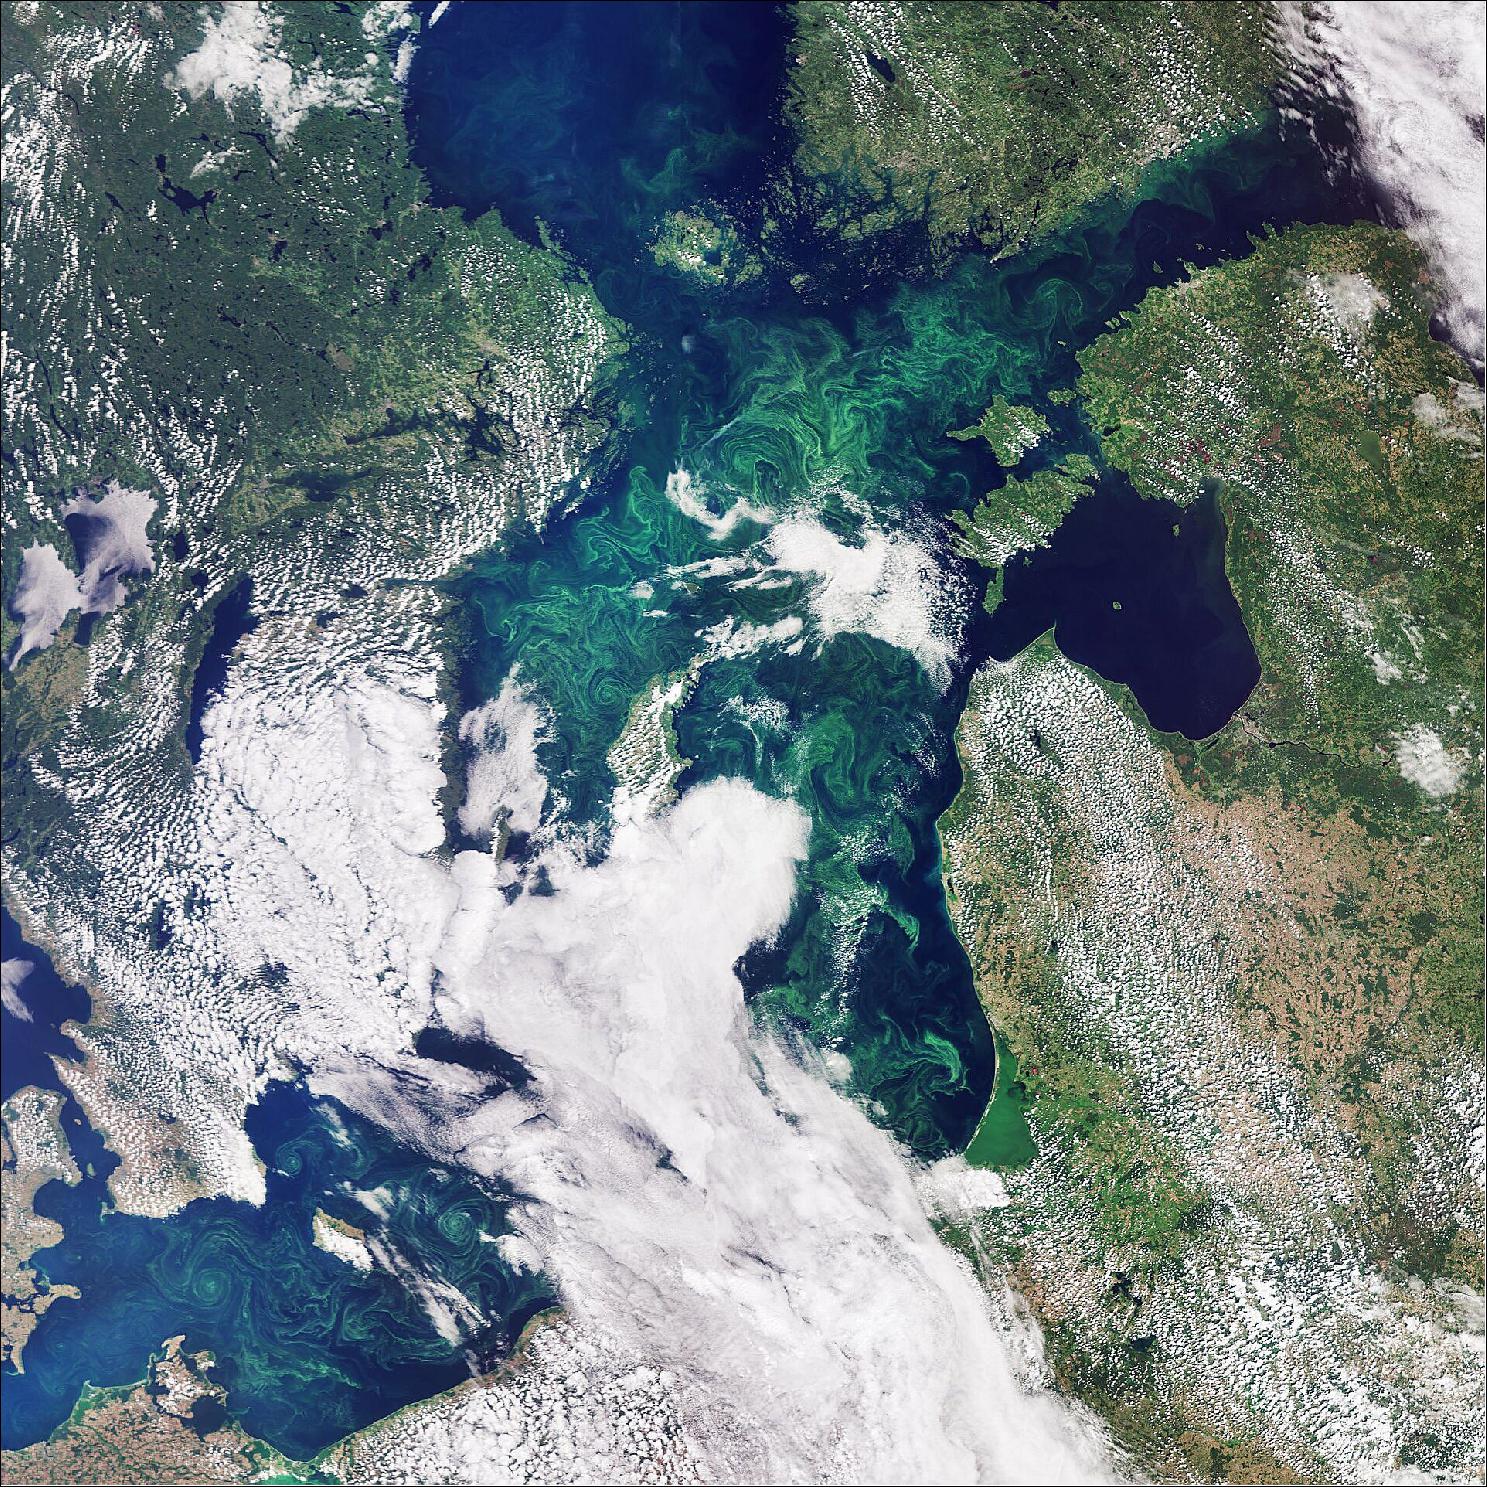 Figure 53: In this image, captured by the Copernicus Sentinel-3 mission, the green algae blooms swirling around the Baltic Sea are visible. The Baltic Sea faces many serious challenges, including toxic pollutants, deep-water oxygen deficiencies and toxic blooms of cyanobacteria affecting the ecosystem, aquaculture and tourism (image credit: ESA, the image contains modified Copernicus Sentinel data (2019), processed by ESA, CC BY-SA 3.0 IGO)